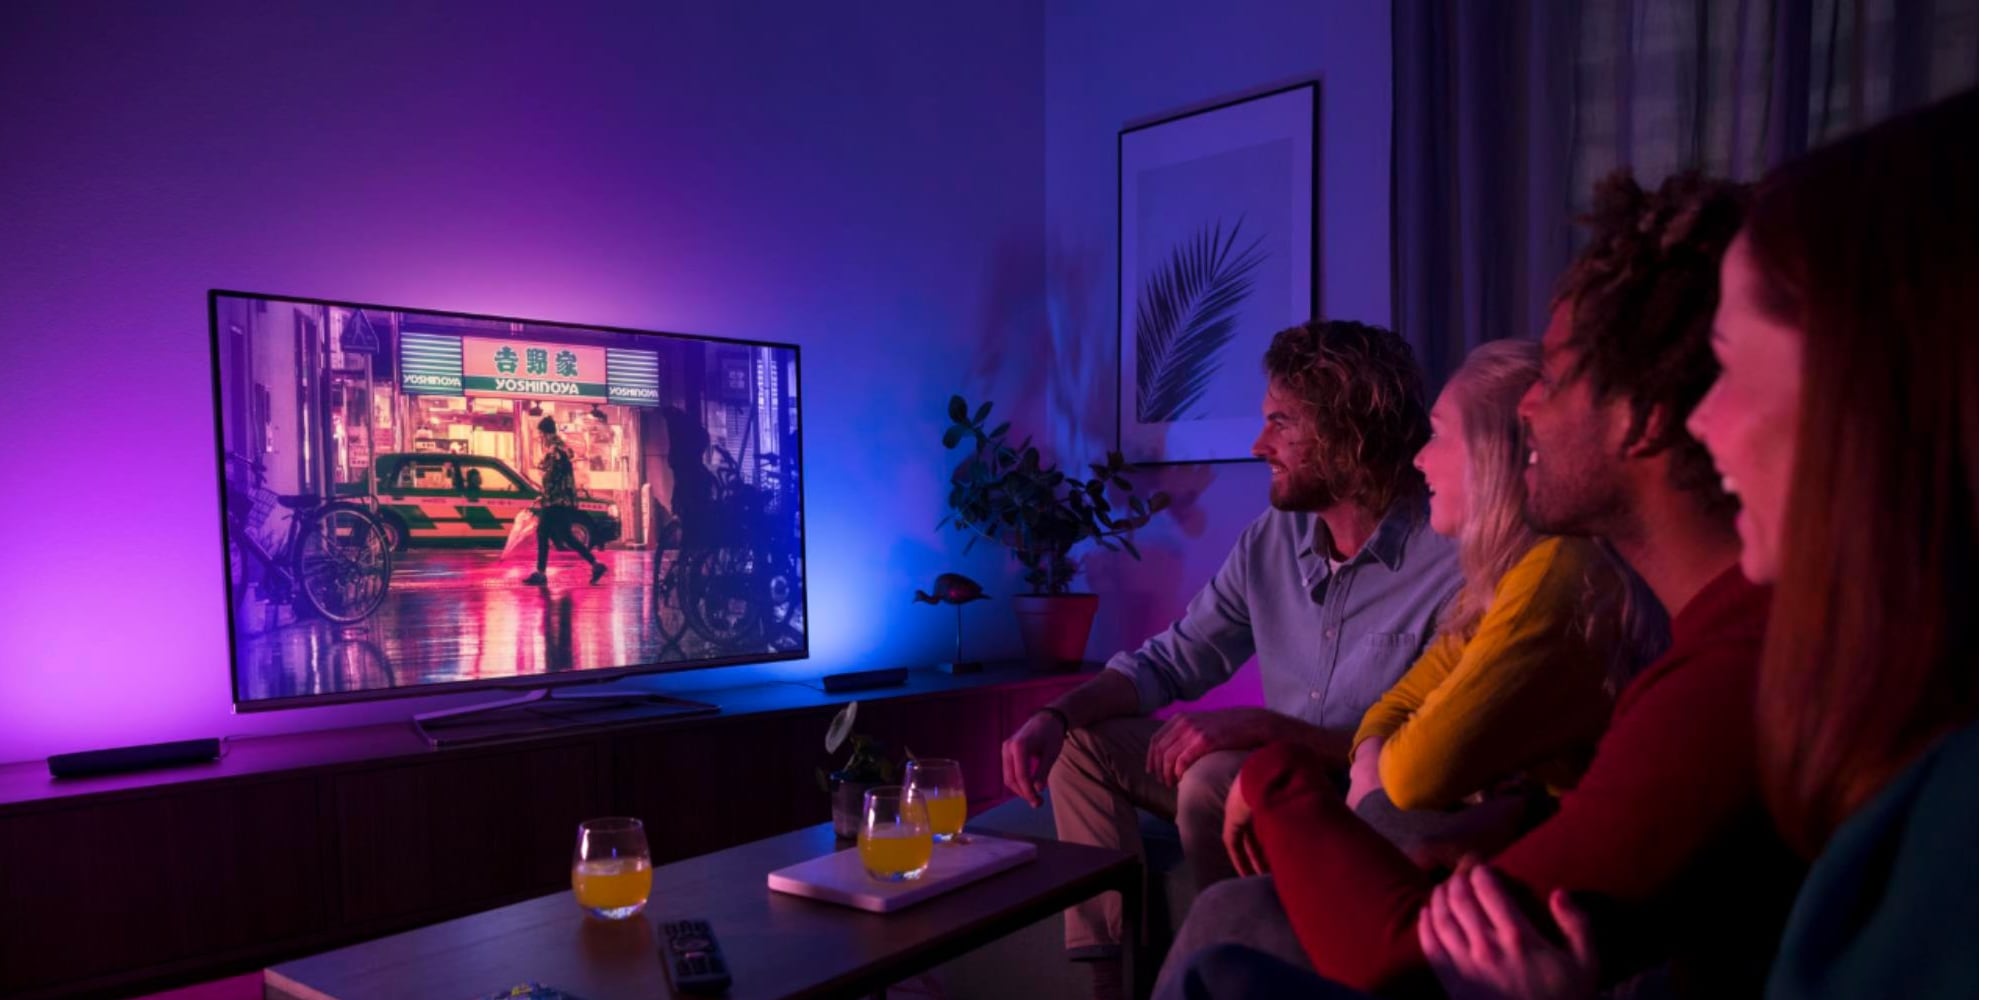 https://9to5mac.com/wp-content/uploads/sites/6/2020/11/Philips-Hue-Play-Lights.jpg?quality=82&strip=all